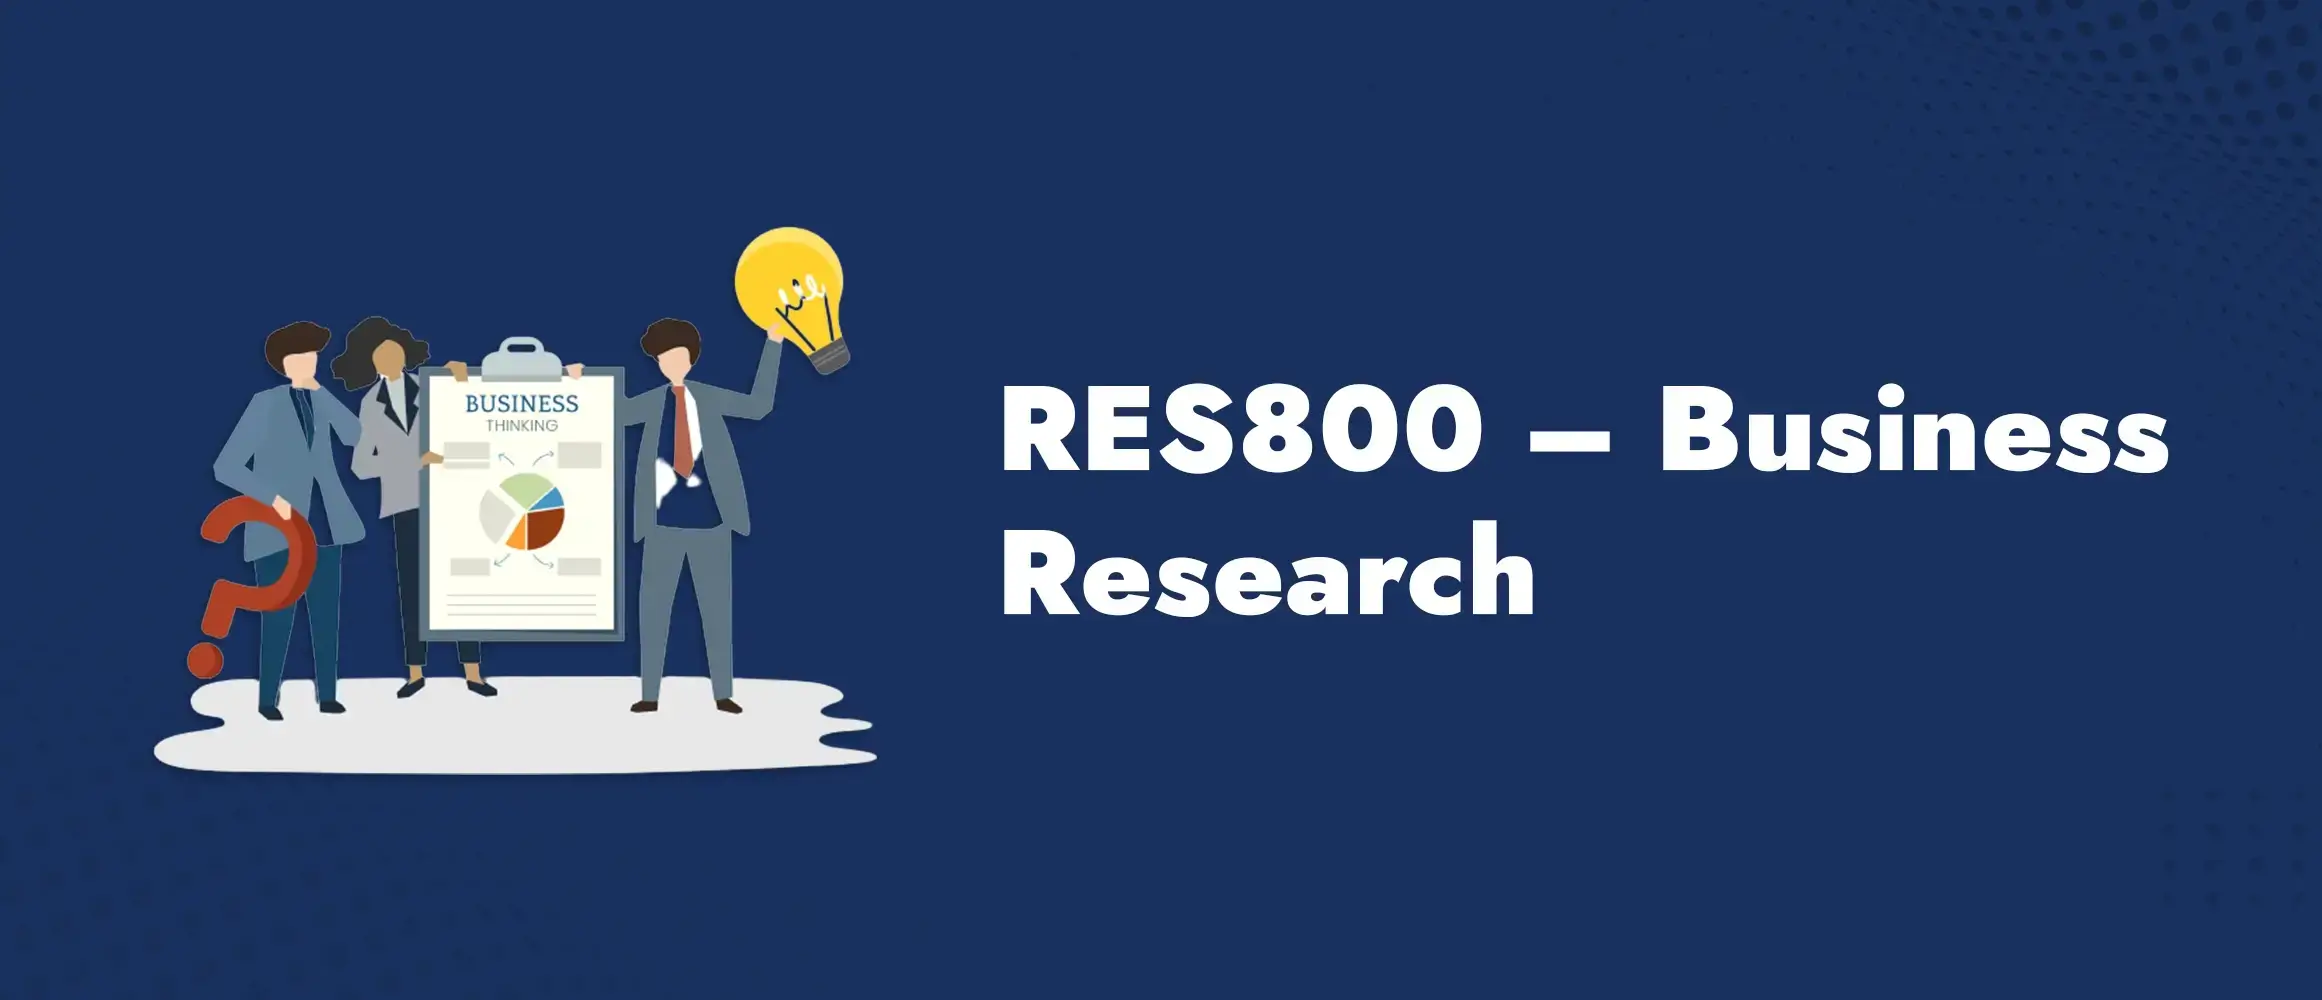 RES800 Business Research